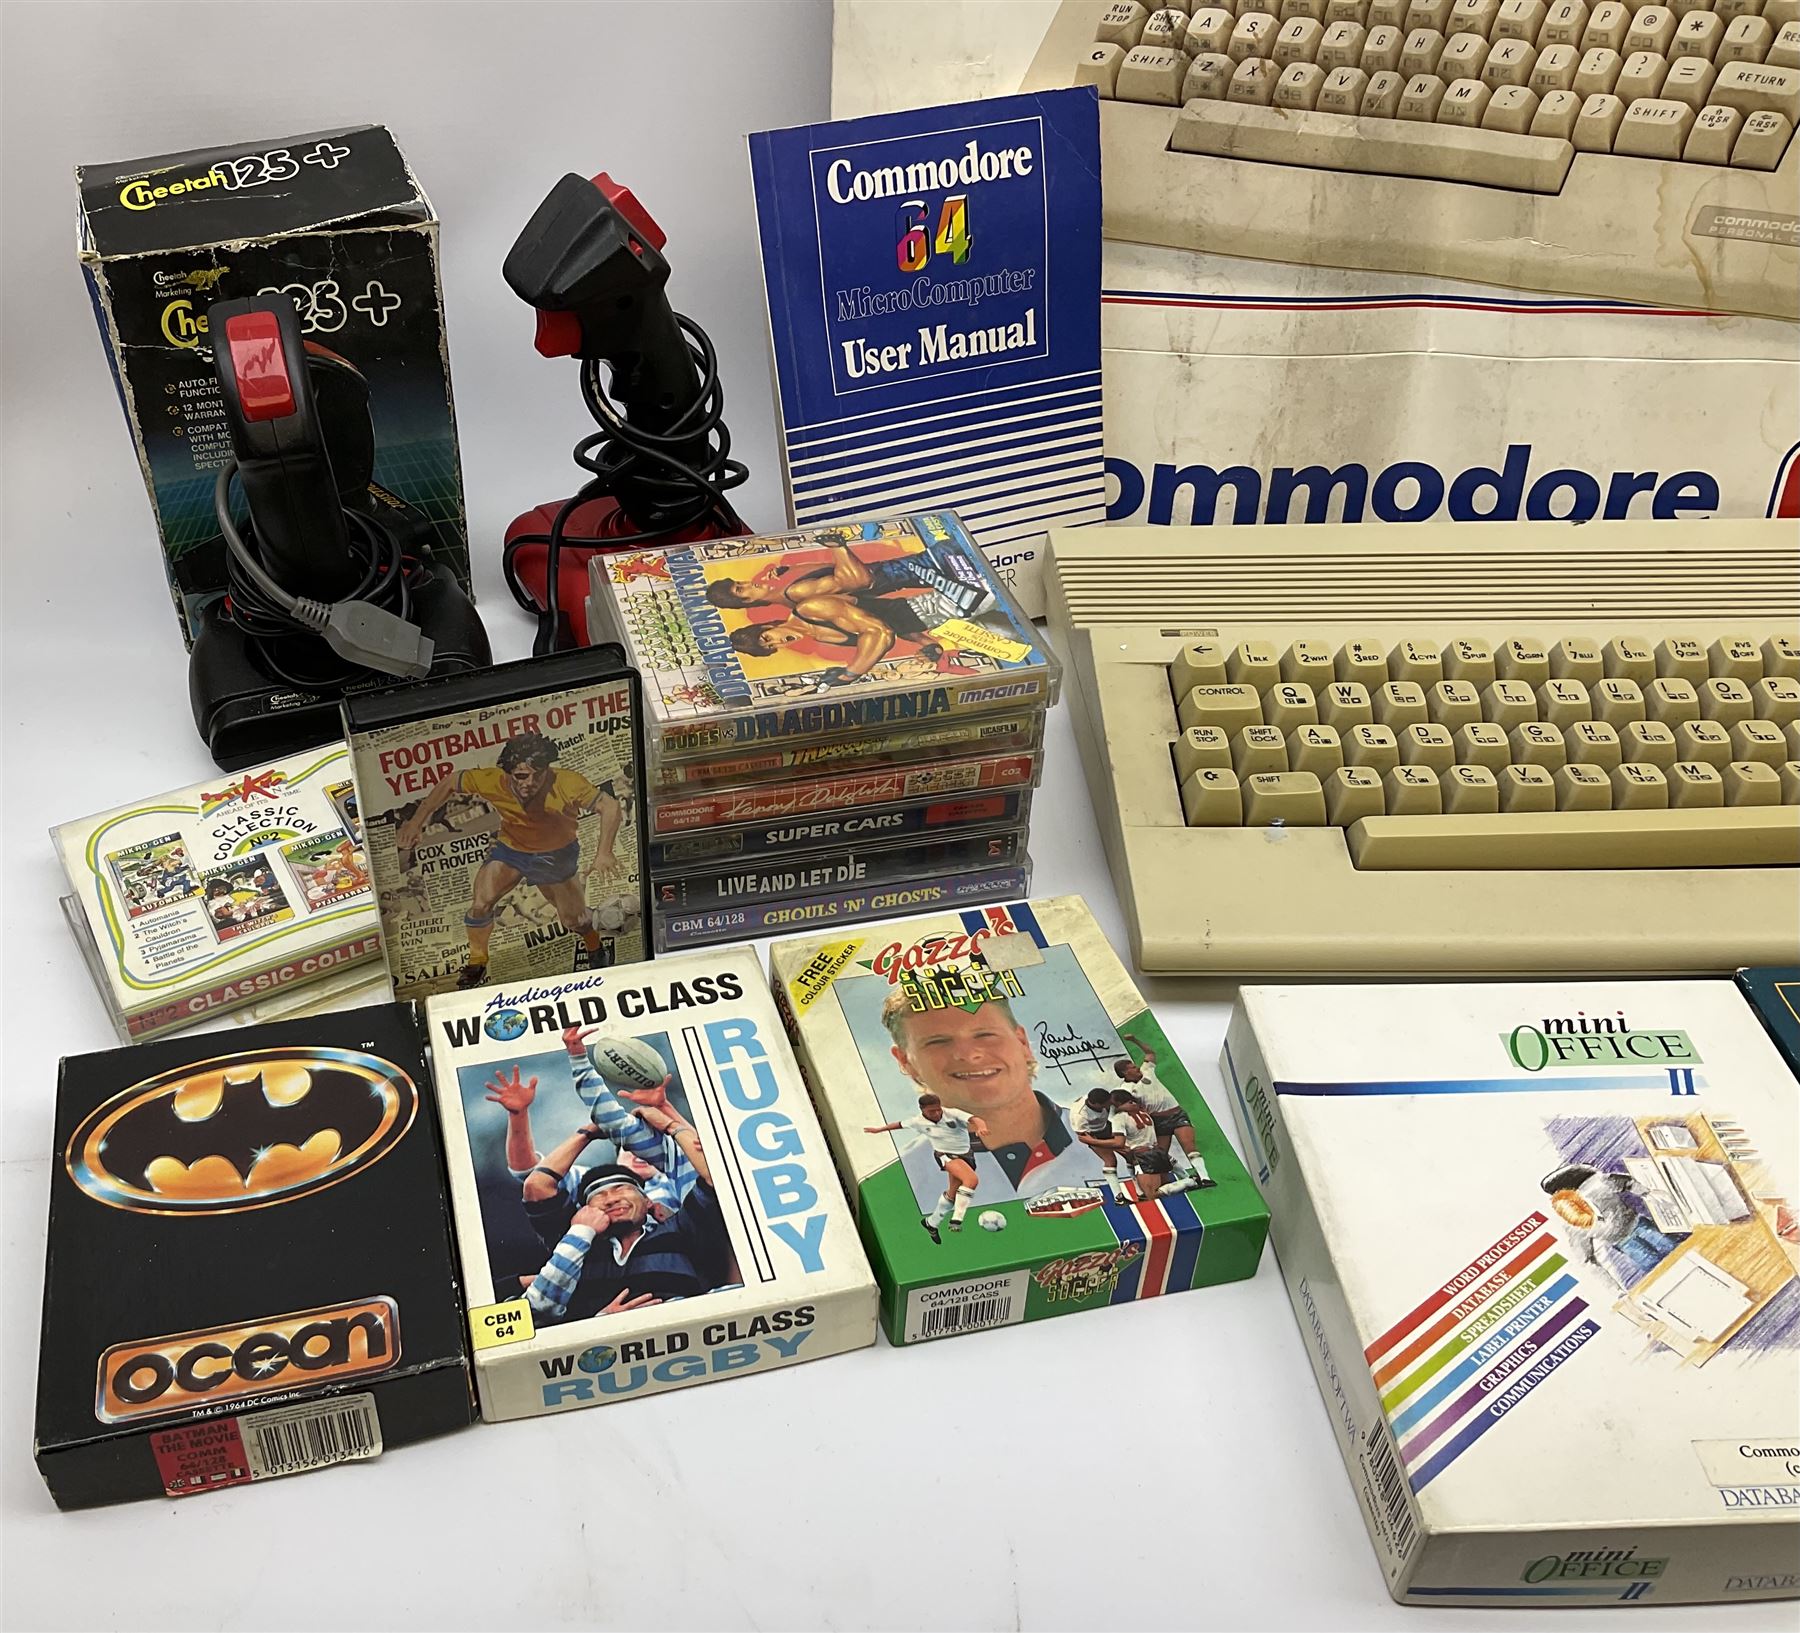 Commodore 64 games computer with boxed 1530 Datassette Unit Model C2N - Image 7 of 8